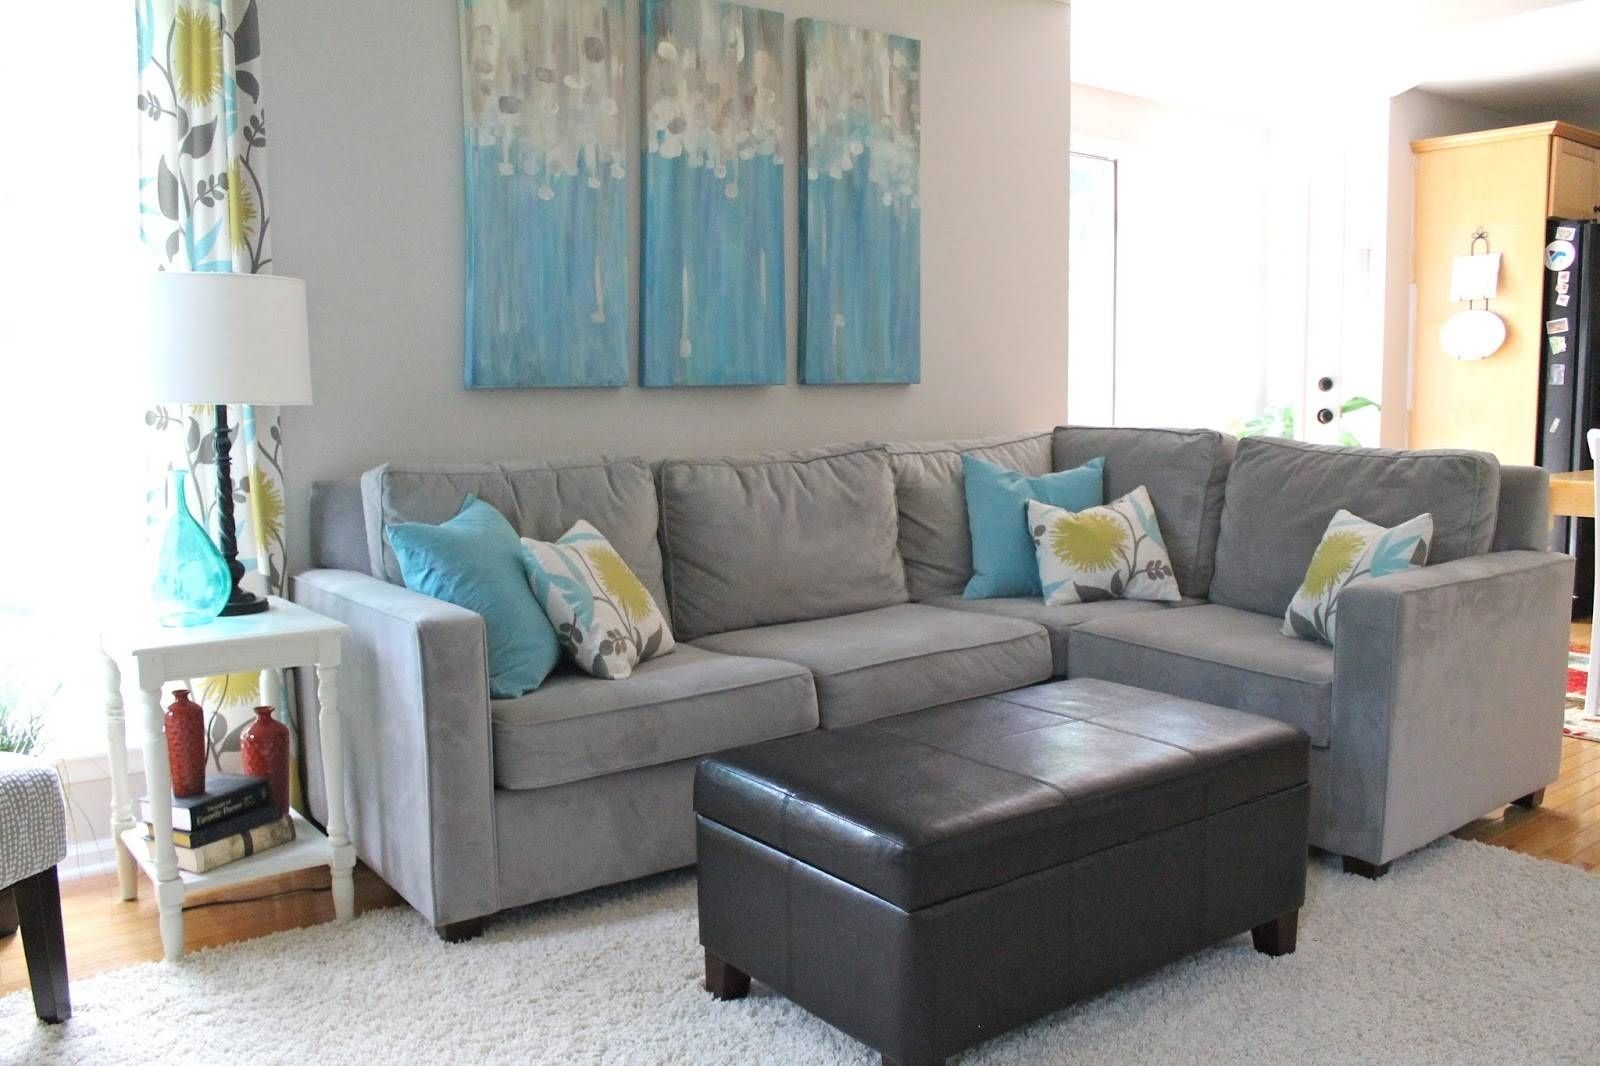 The New Family Room Reveal With West Elm Henry Sectional Sofas (View 11 of 15)